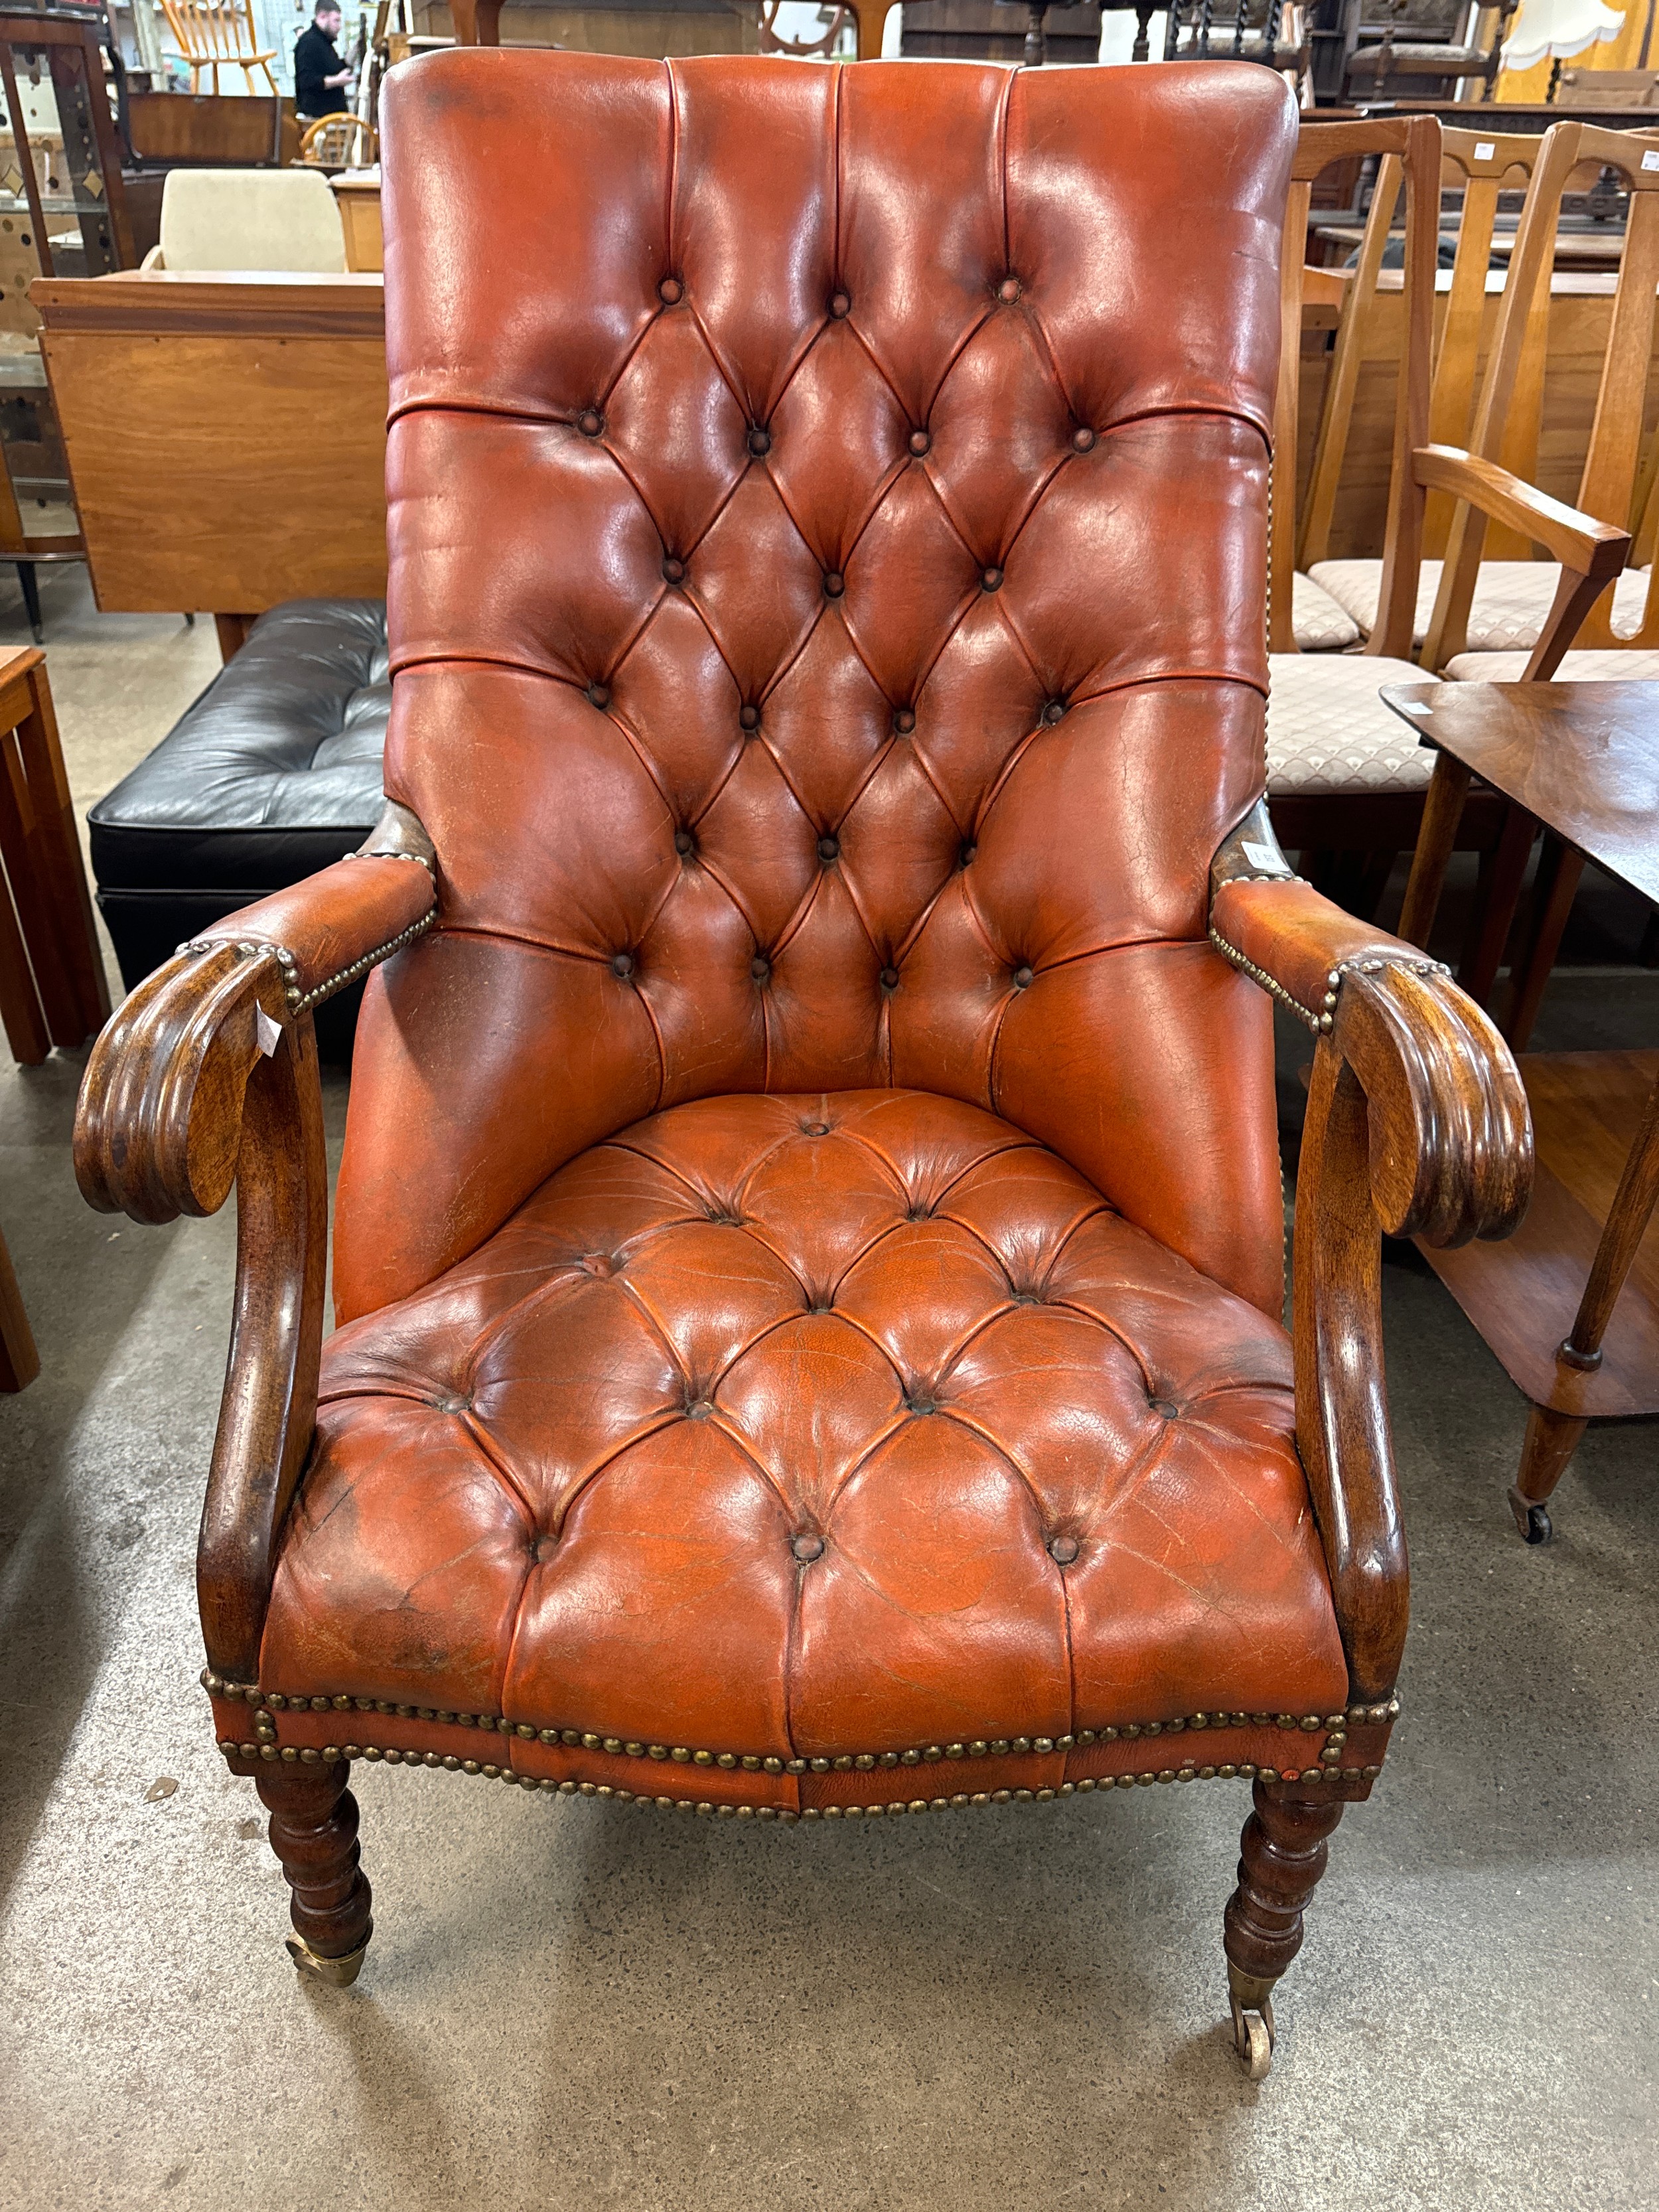 A Regency style mahogany and red leather open armchair